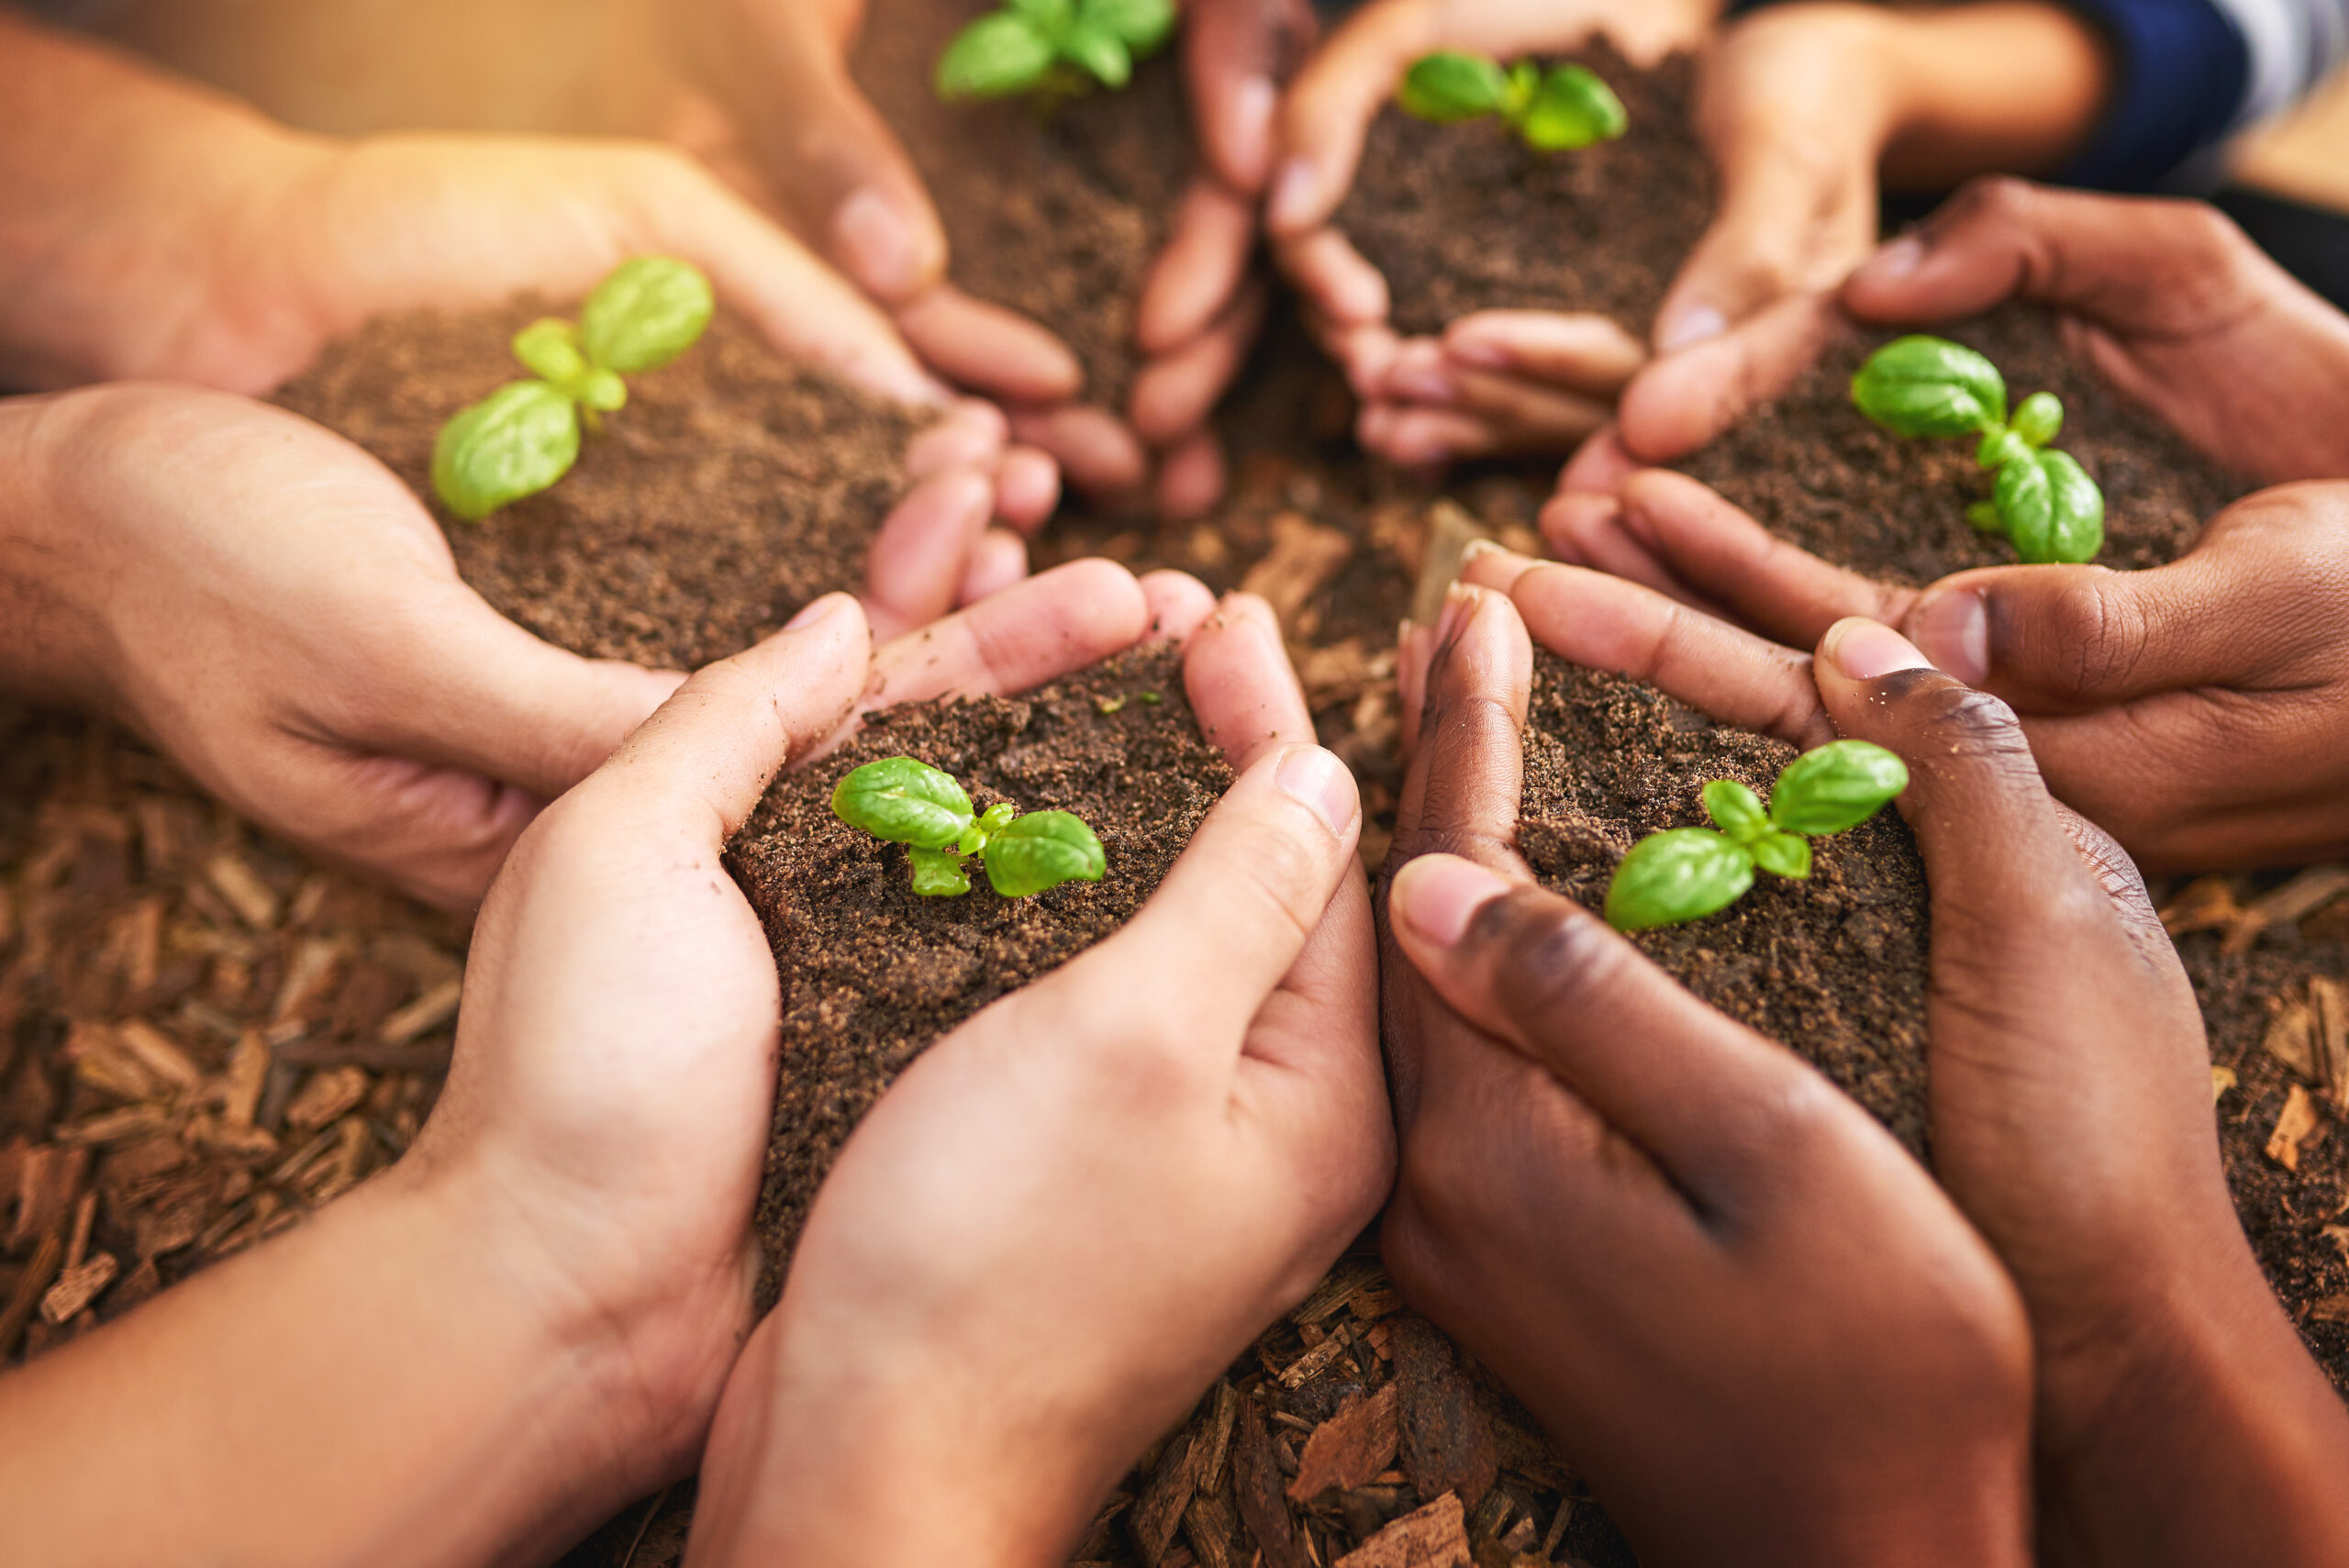 Nurturing Your Career Growth: From Seed to Tree